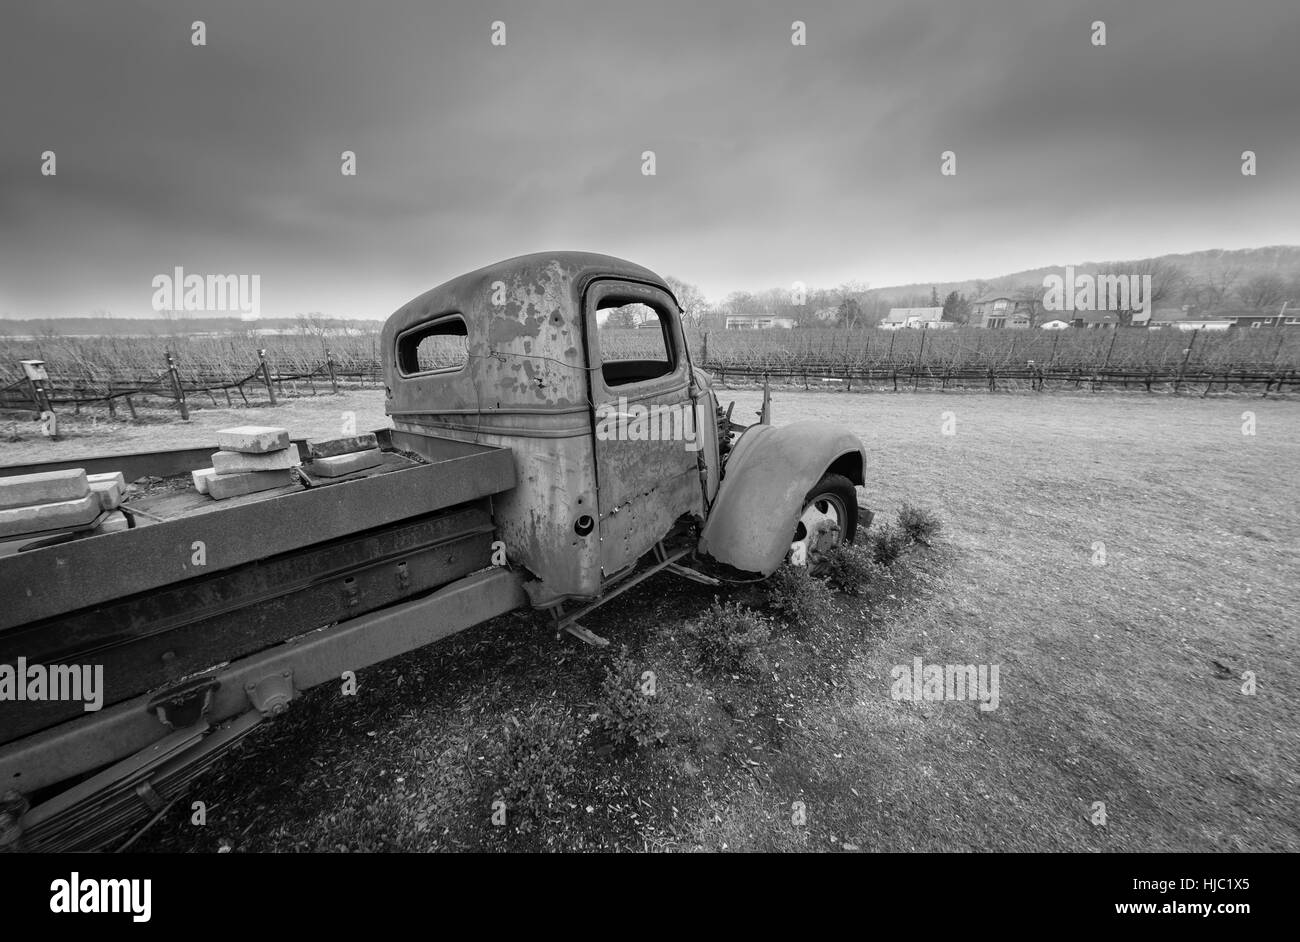 A black and white photograph of an old truck with bullet holes in the door in a vineyard on an overcast day. Stock Photo